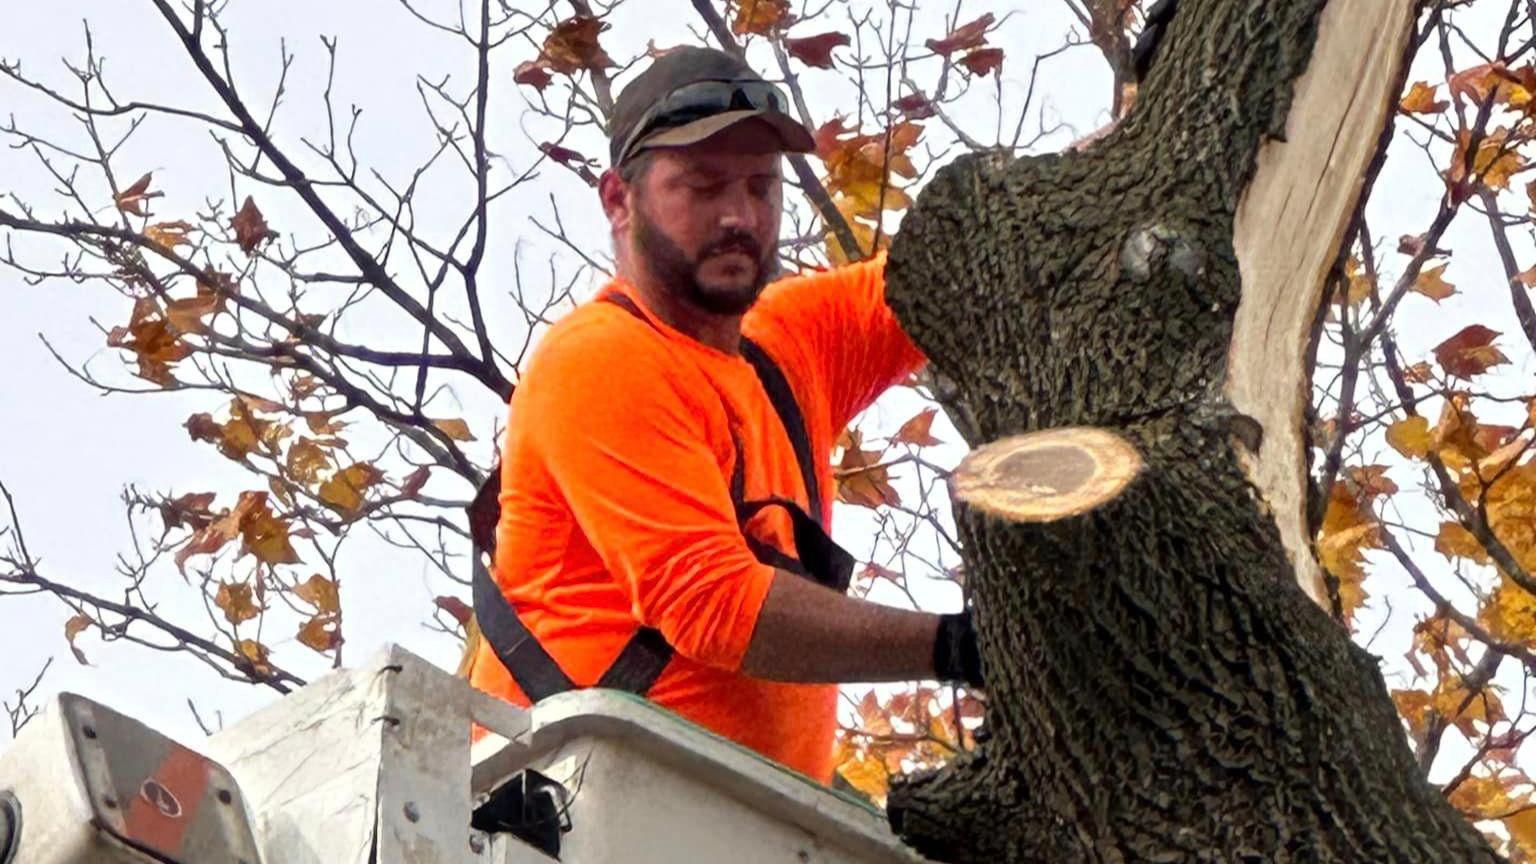 S&P Tree Professionals is your trusted local tree service provider, serving the community with pride. Our team understands the unique needs of the area, and our commitment to quality and customer satisfaction sets us apart. Count on us for prompt and professional tree care solutions to meet your specific requirements.